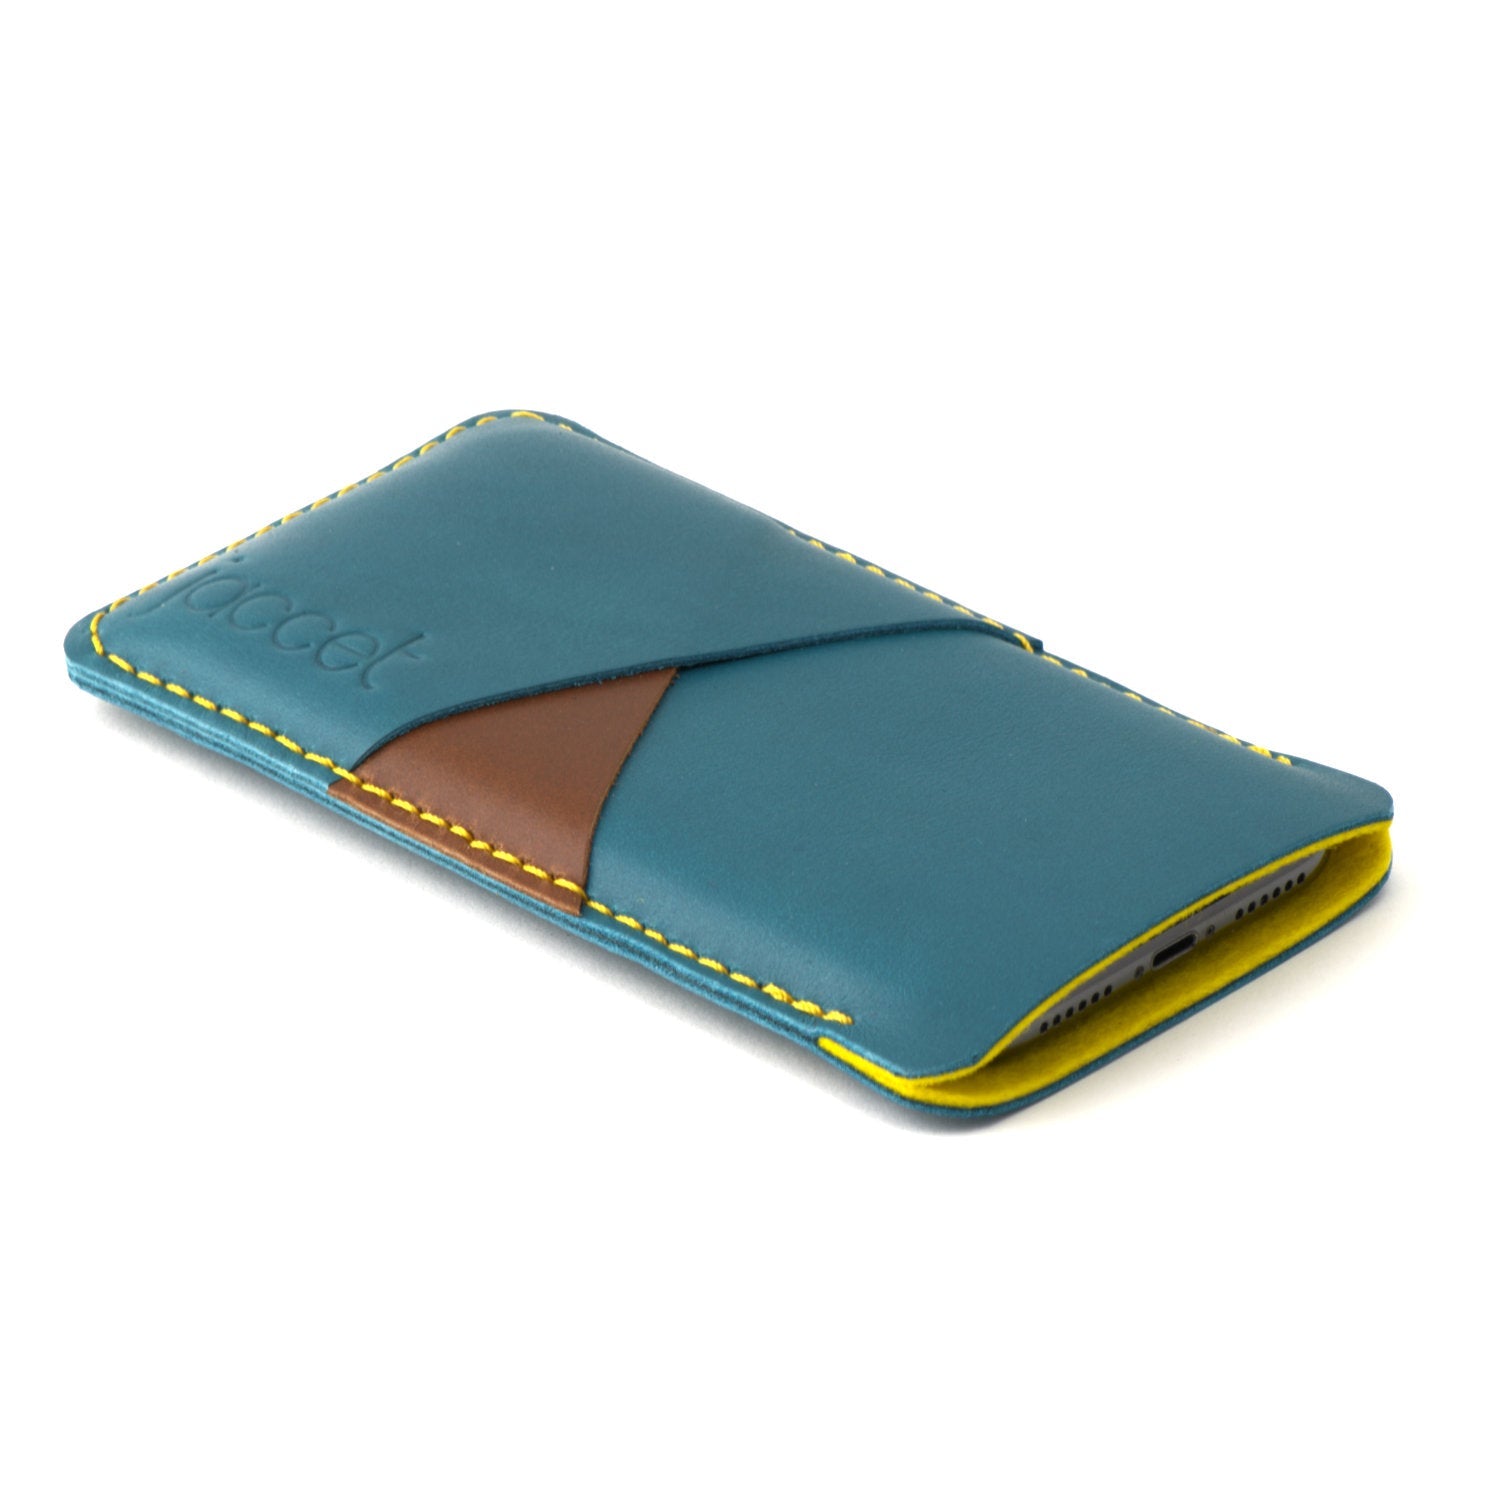 Full-grain leather Sony Xperia sleeve - Turquoise leather with two pockets for cards